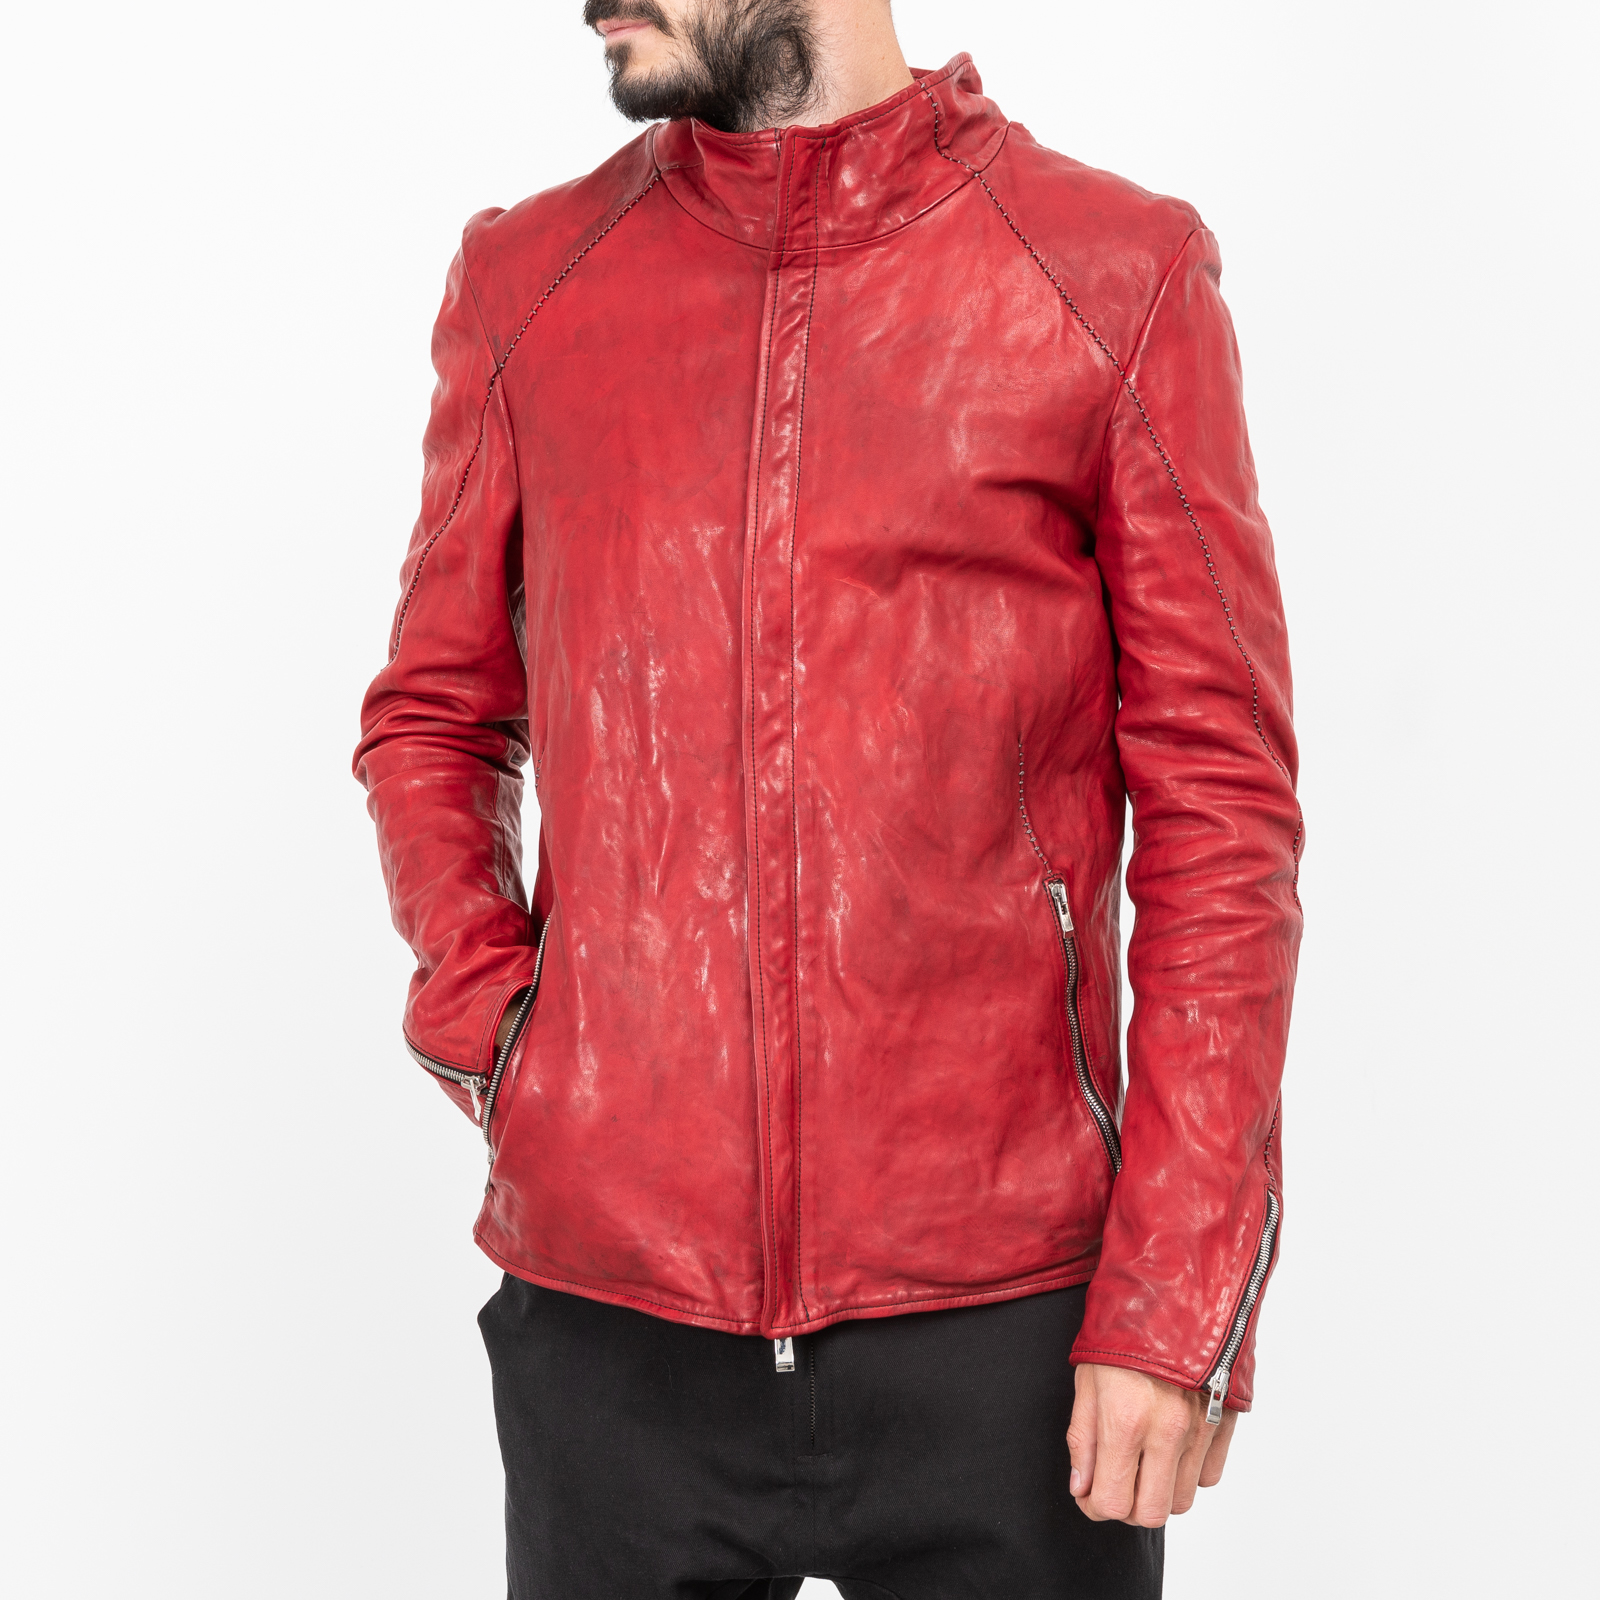 DIRTY RED HORSE LEATHER JACKET|wolfensson